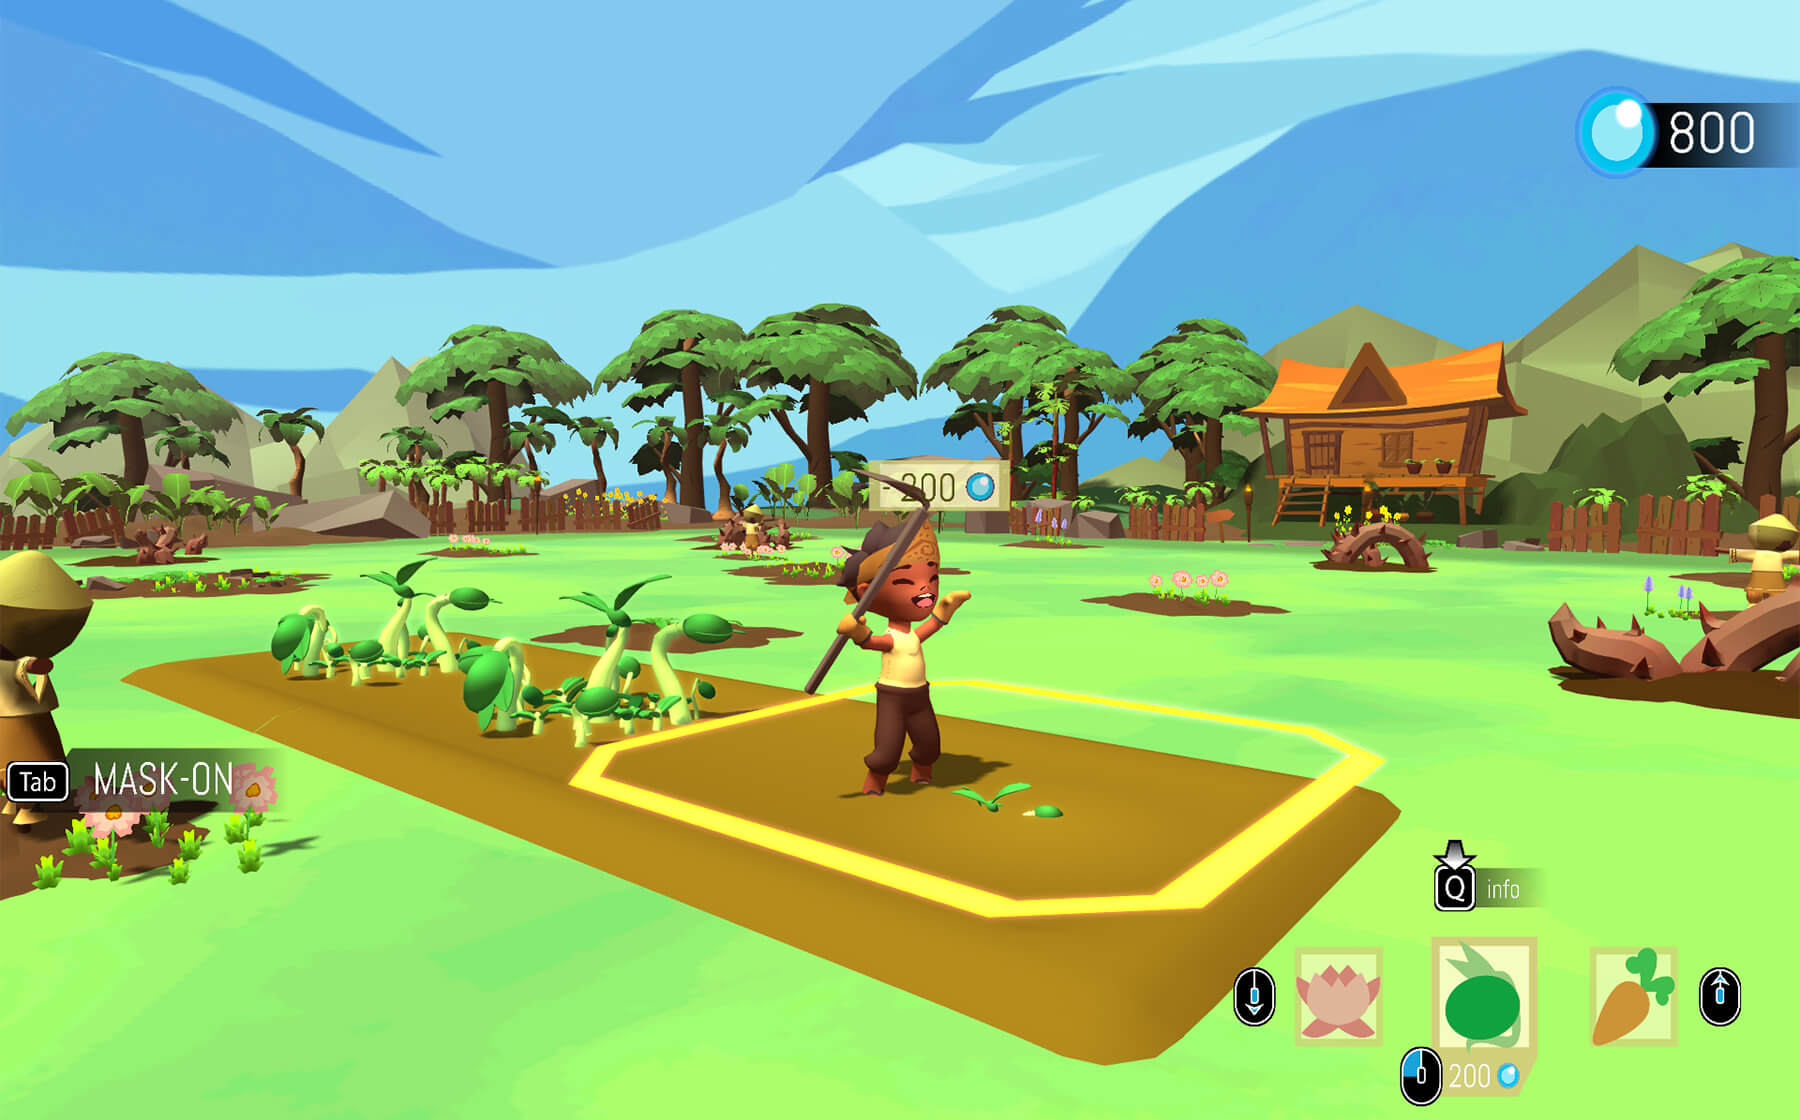 A game character happily holds a scythe in a garden